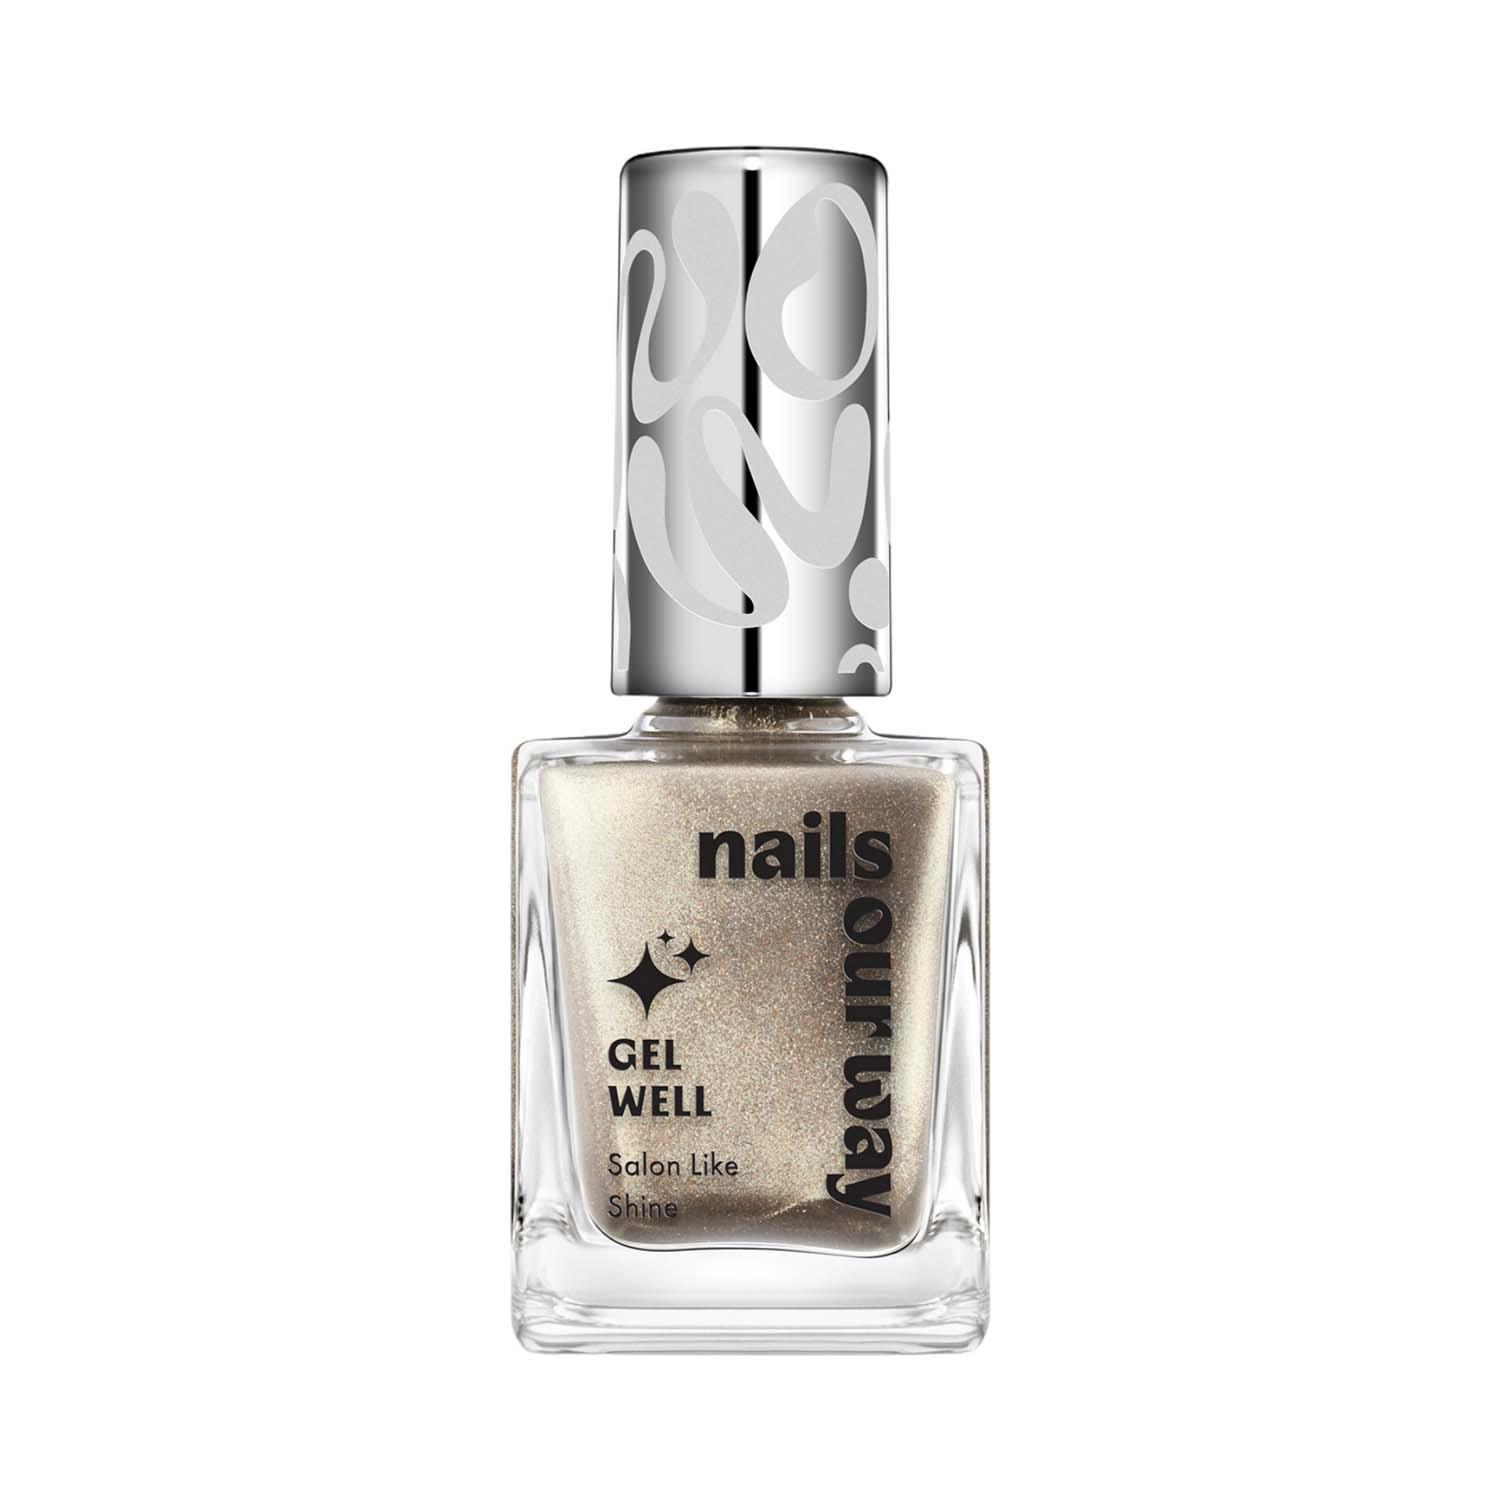 Nails Our Way | Nails Our Way Gel Well Nail Enamel - 603 Invigorating (10 ml)